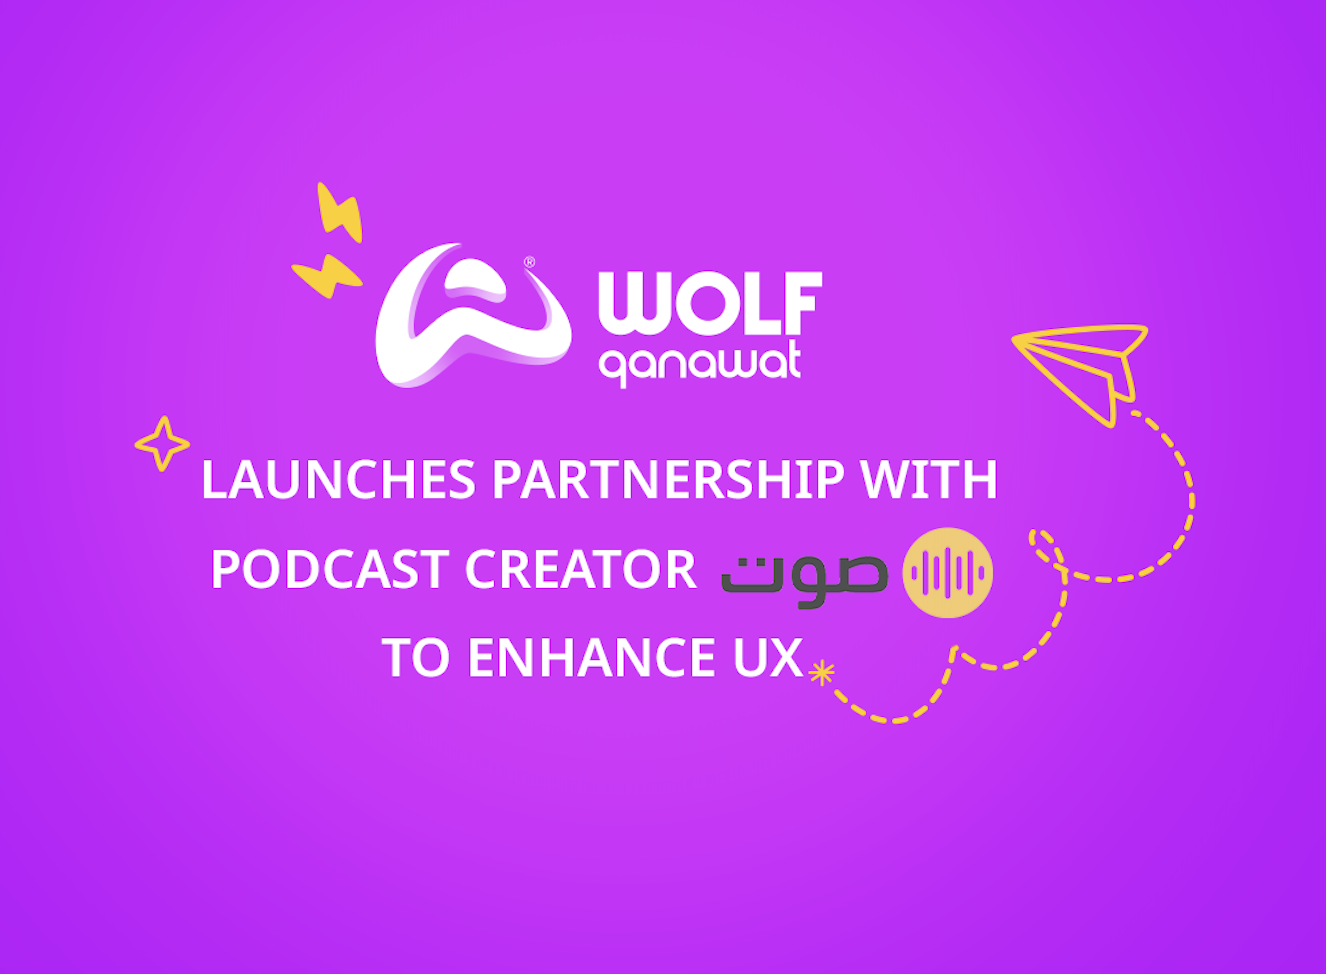 WOLF Qanawat launches partnership with Sowt to enhance user experience